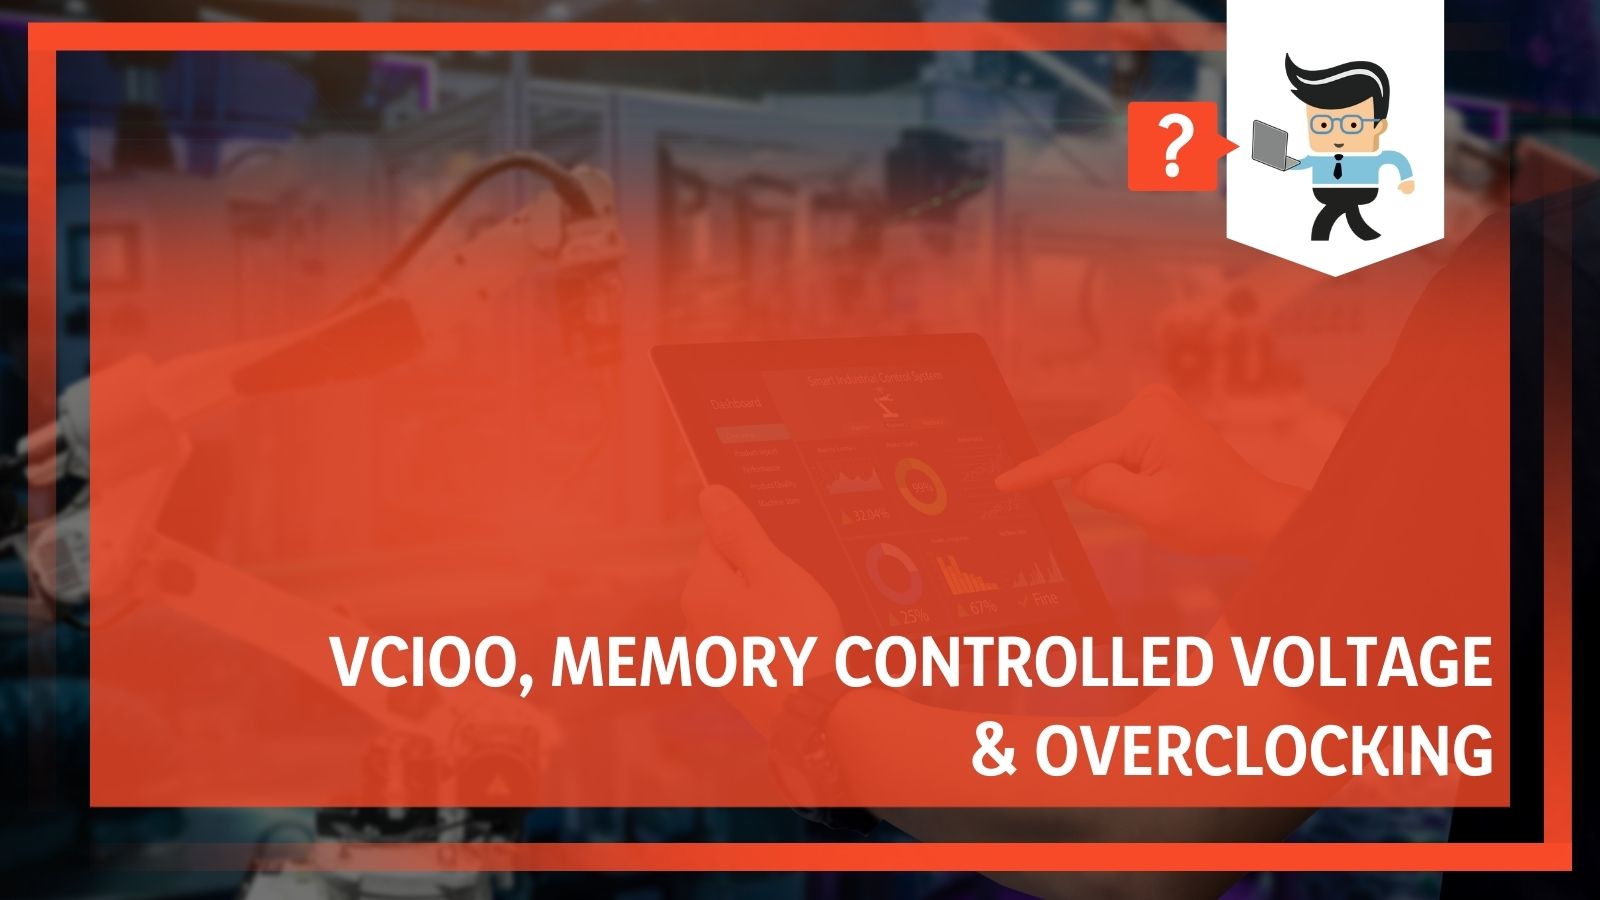 VCIOO, Memory Controlled Voltage, & Overclocking